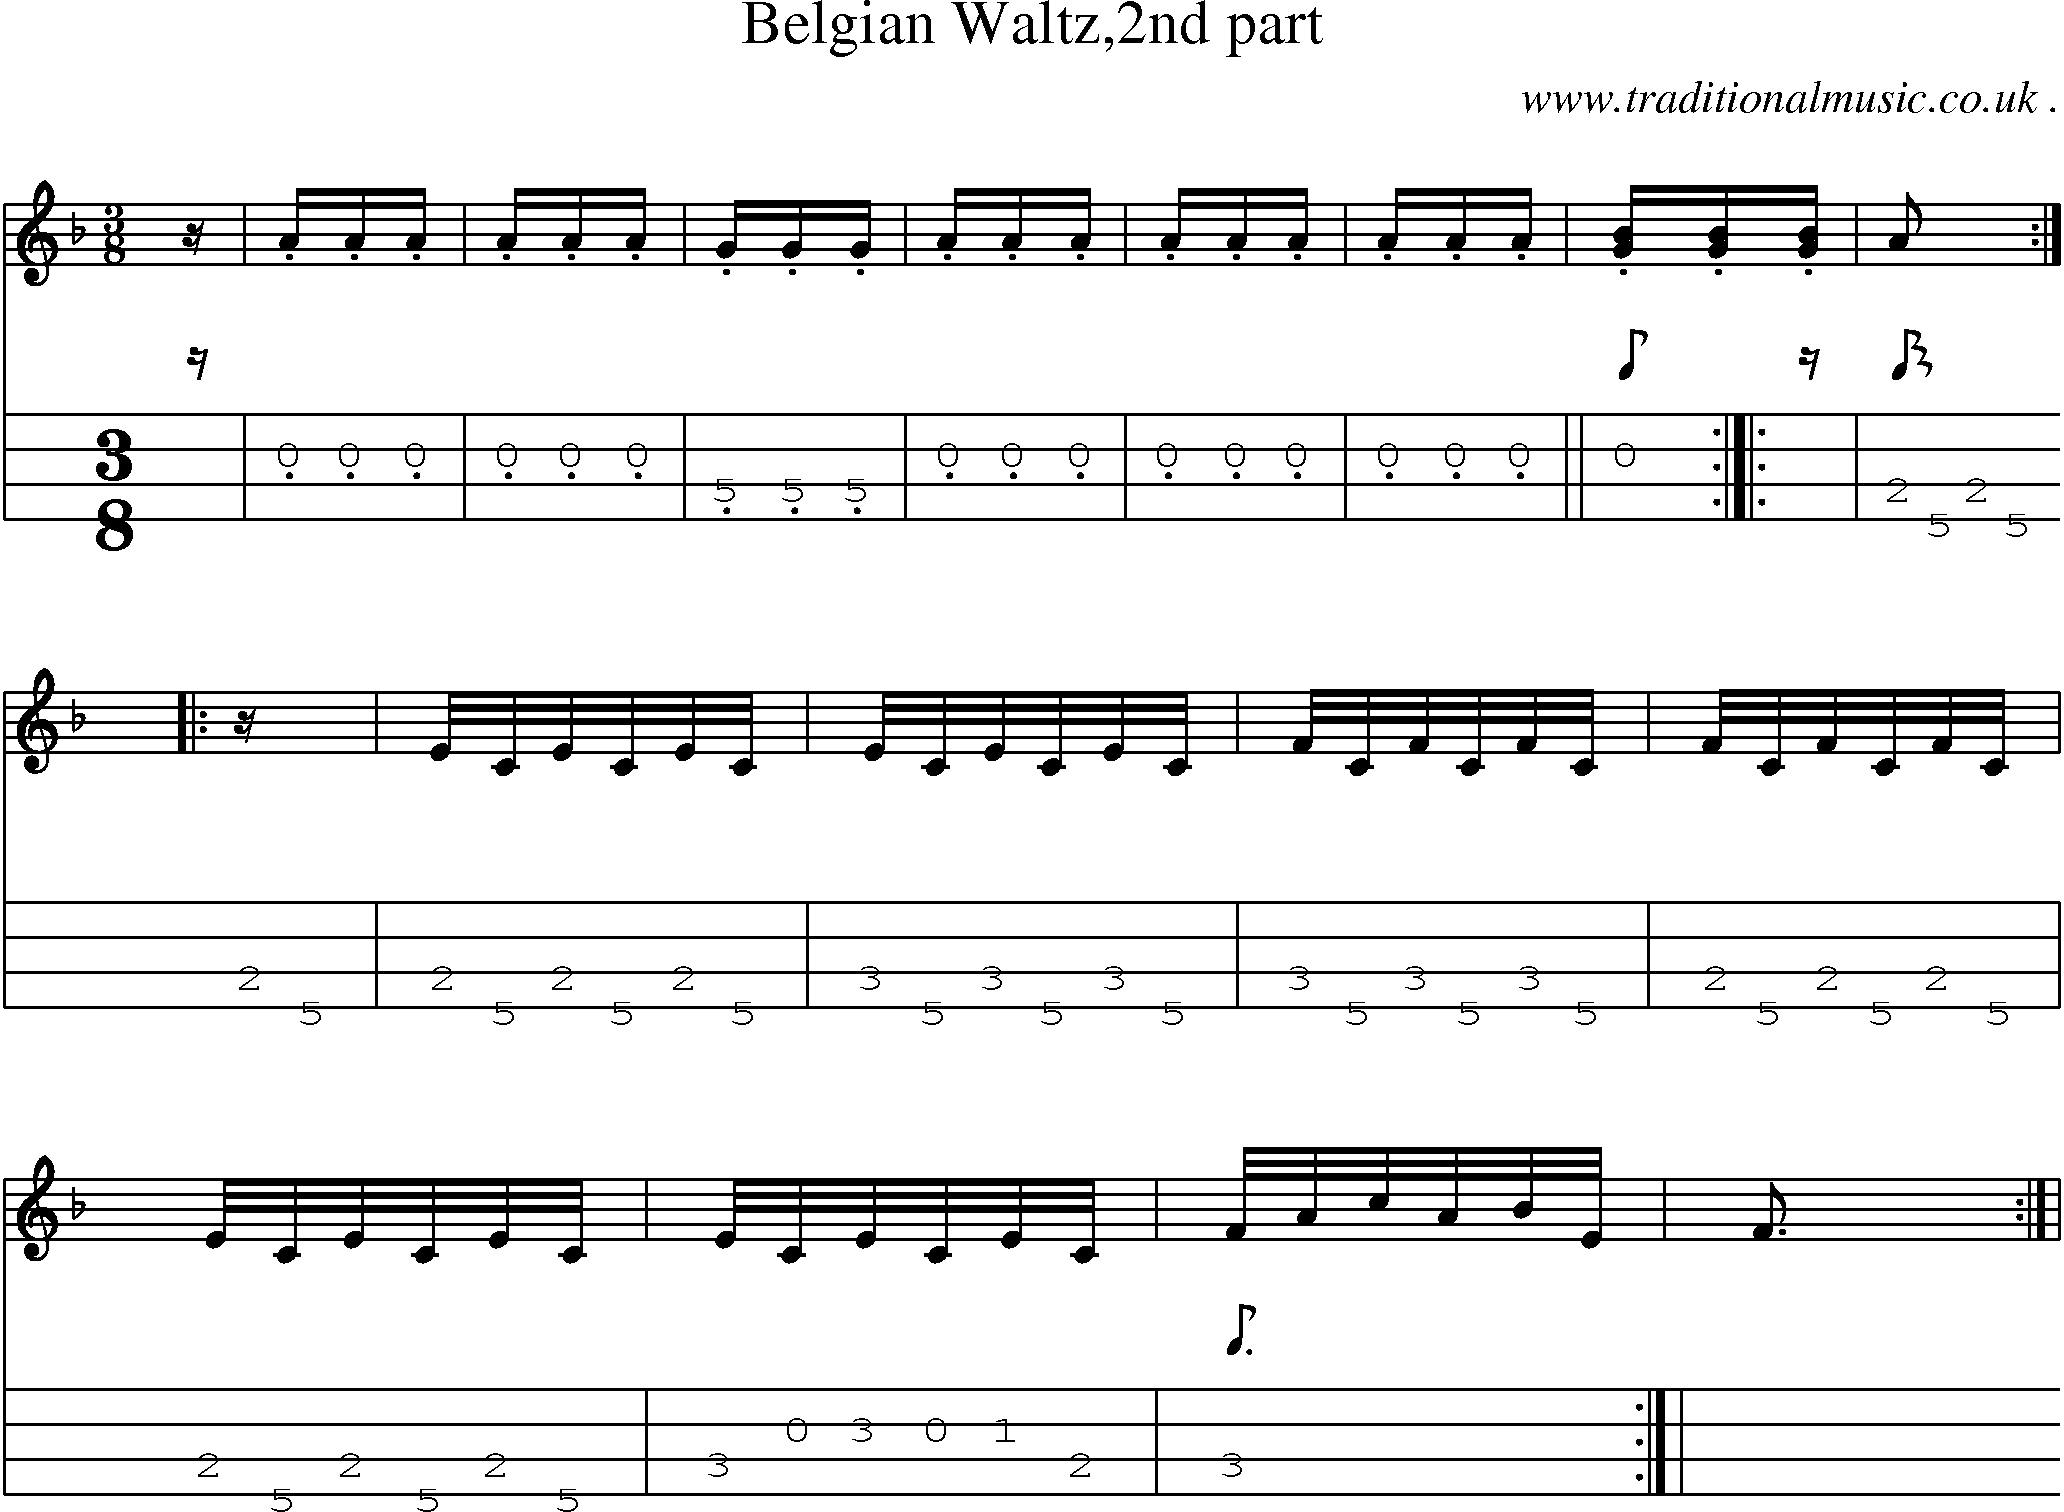 Sheet-Music and Mandolin Tabs for Belgian Waltz2nd Part